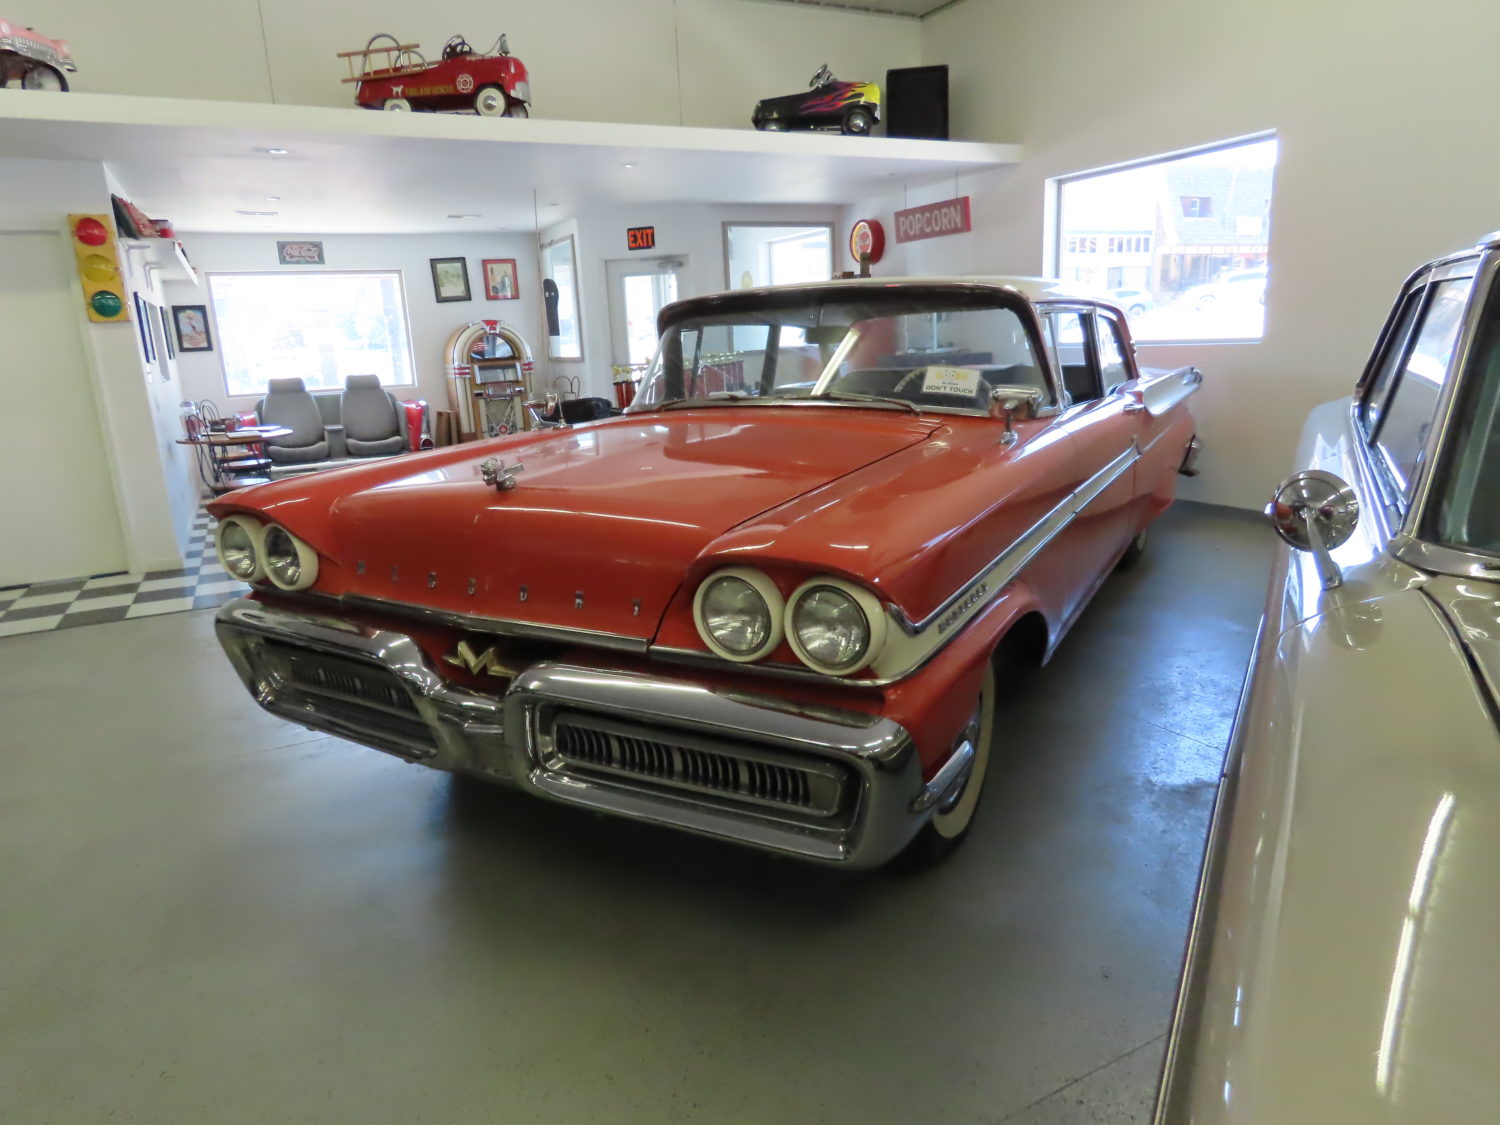 Approx. 100 American Classics Cars At Auction! The Sorensen Collection-LIVE ONSITE W/ONLINE BIDDING!  - image 14